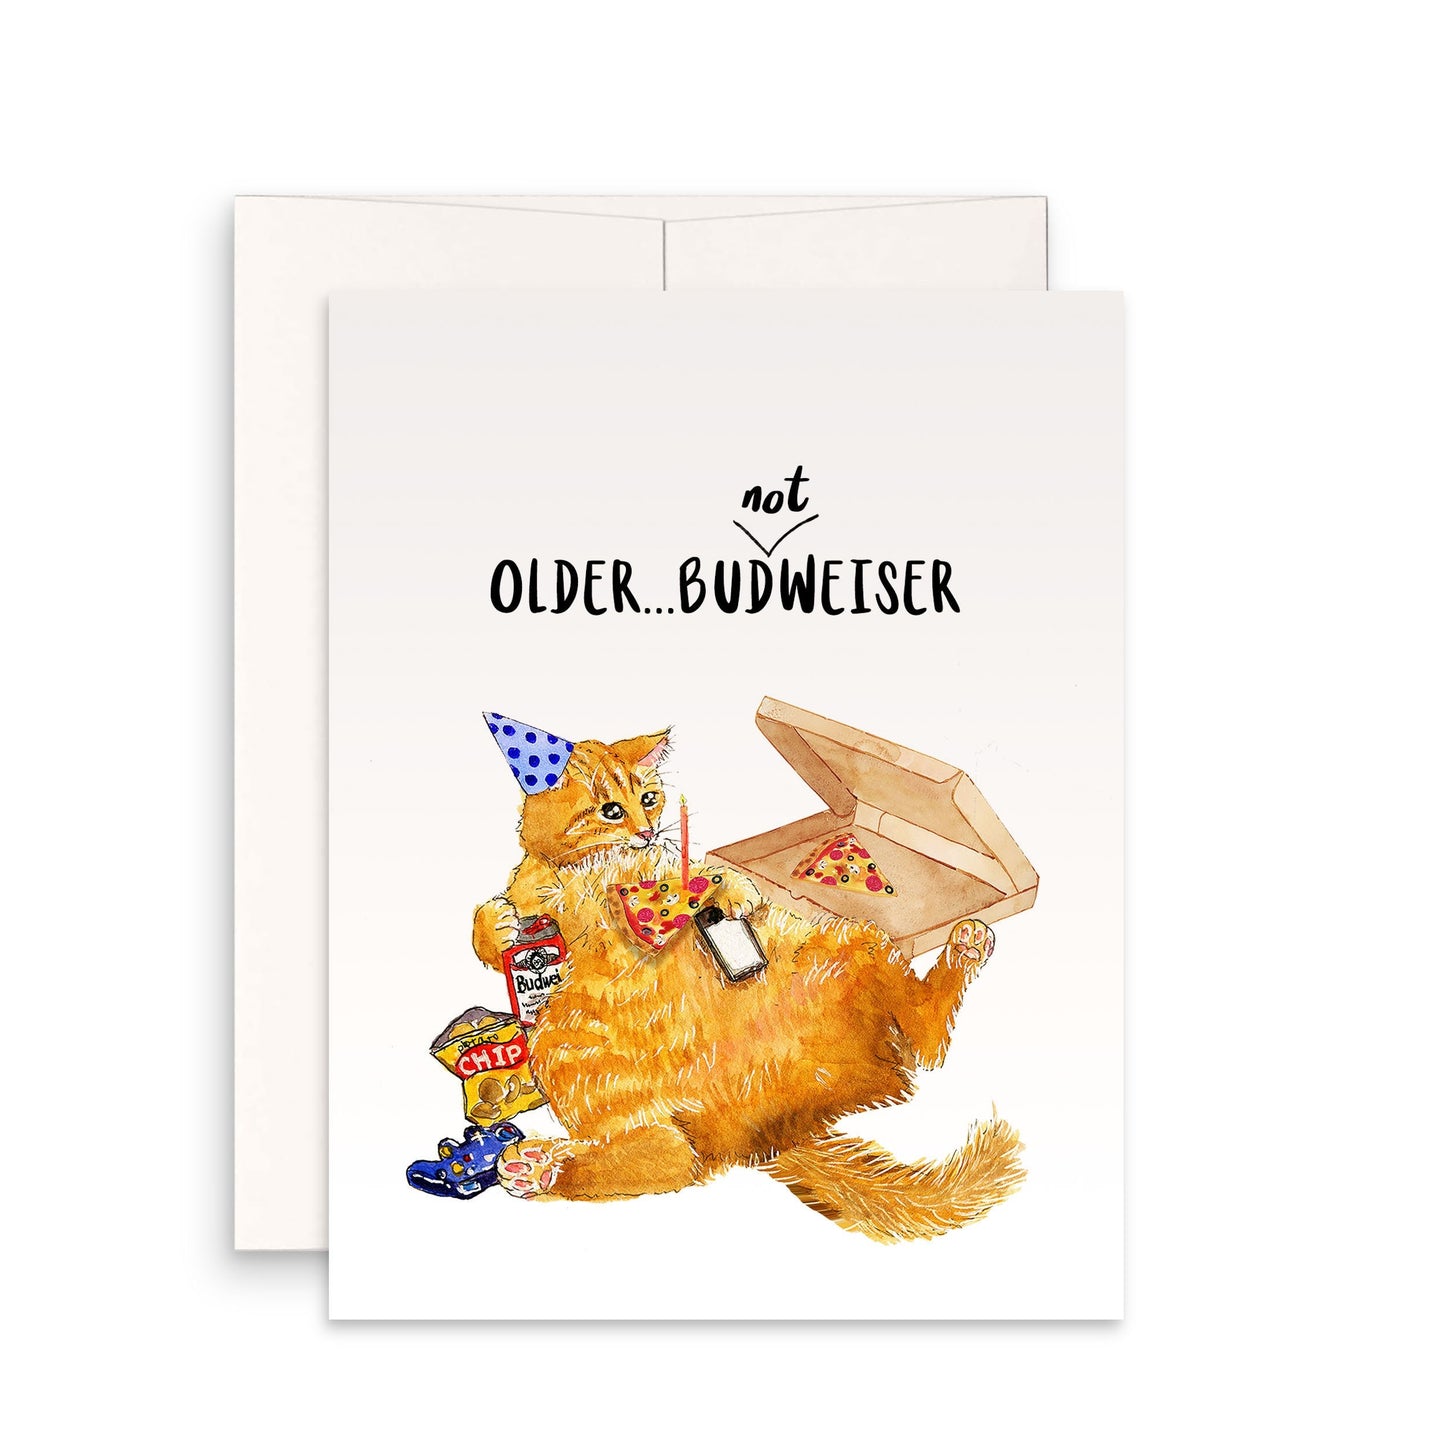 Beer Pizza Gamer Cat Birthday Card Funny - Older But Not Wiser - Orange Tabby Cat Birthday Cards For Friends